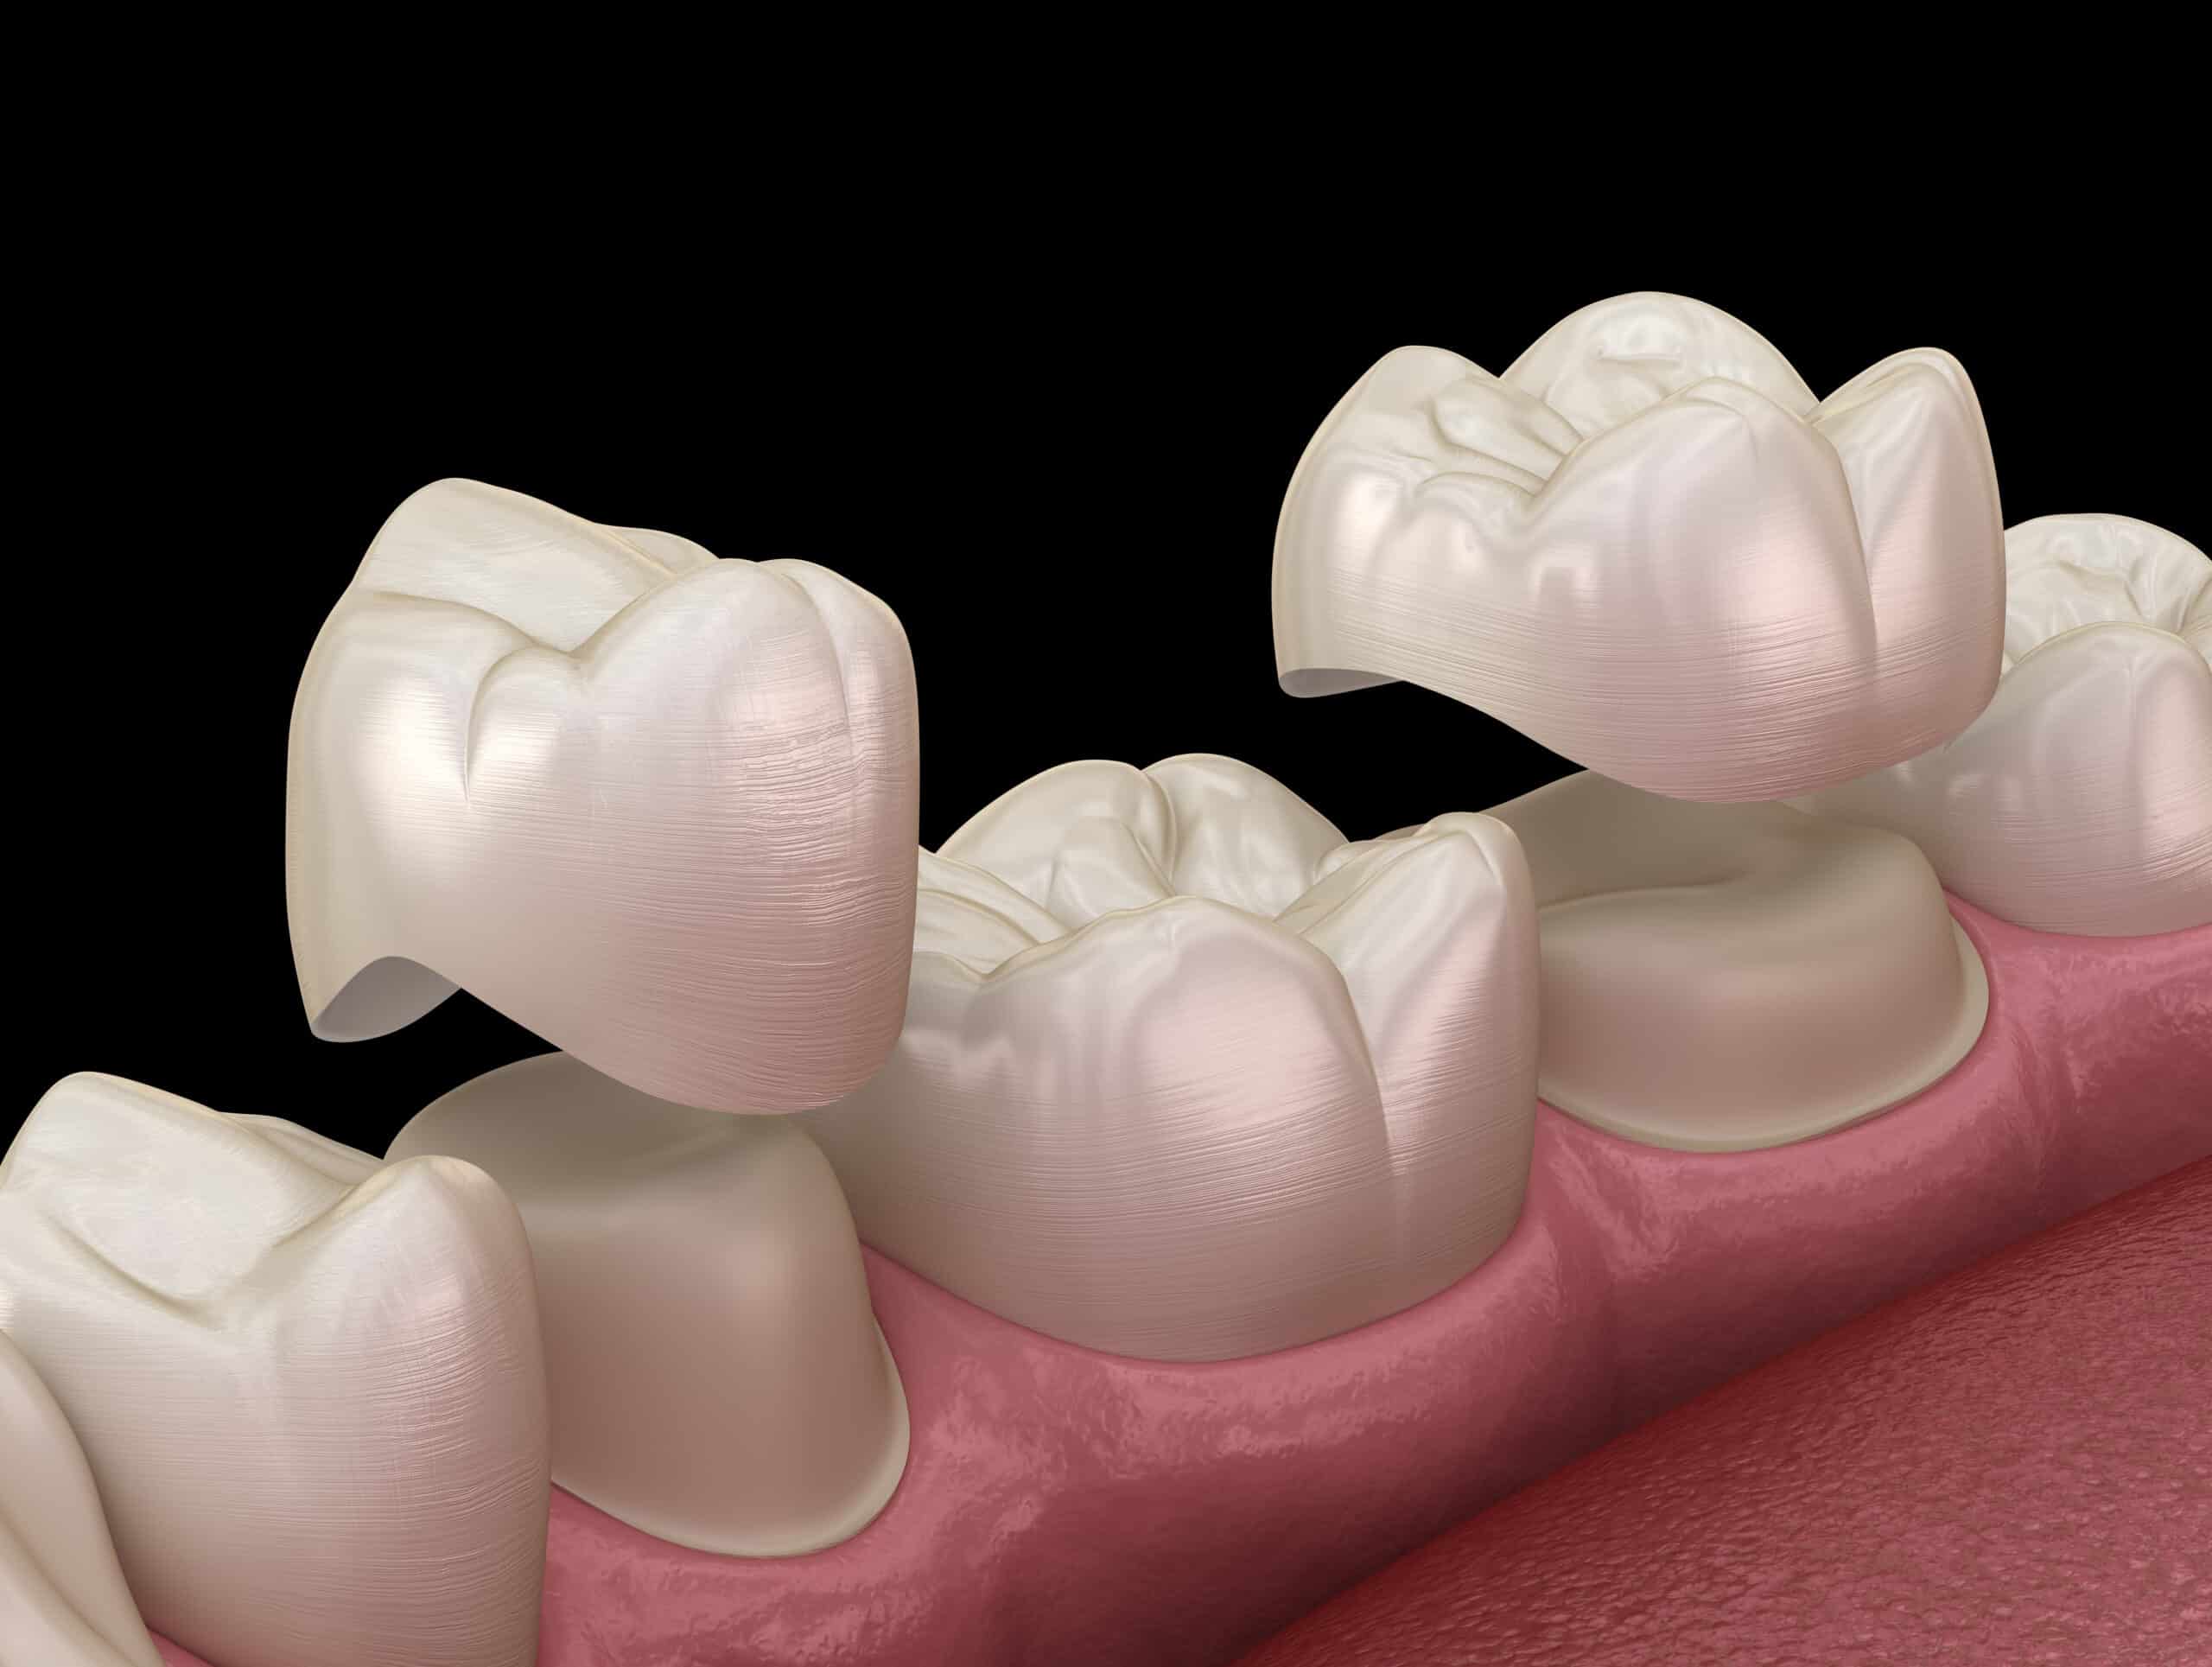 Porcelain crowns placement over premolar and molar teeth